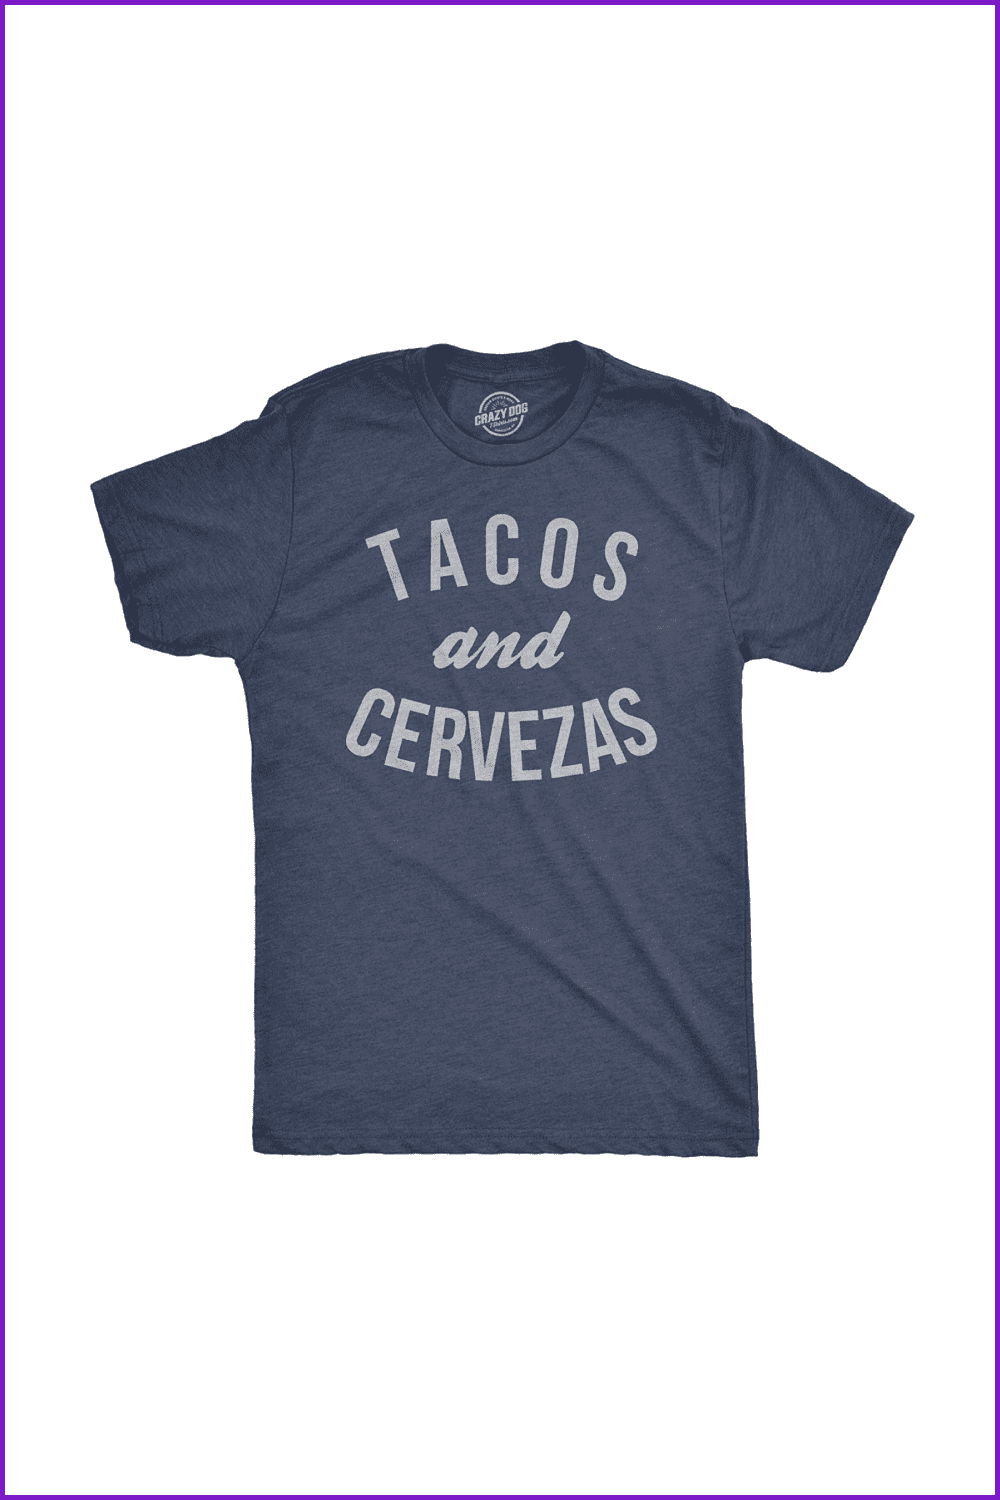 Mens Tacos and Cervezas Funny T Shirt for Vacation Sarcastic Humor Graphic Top.